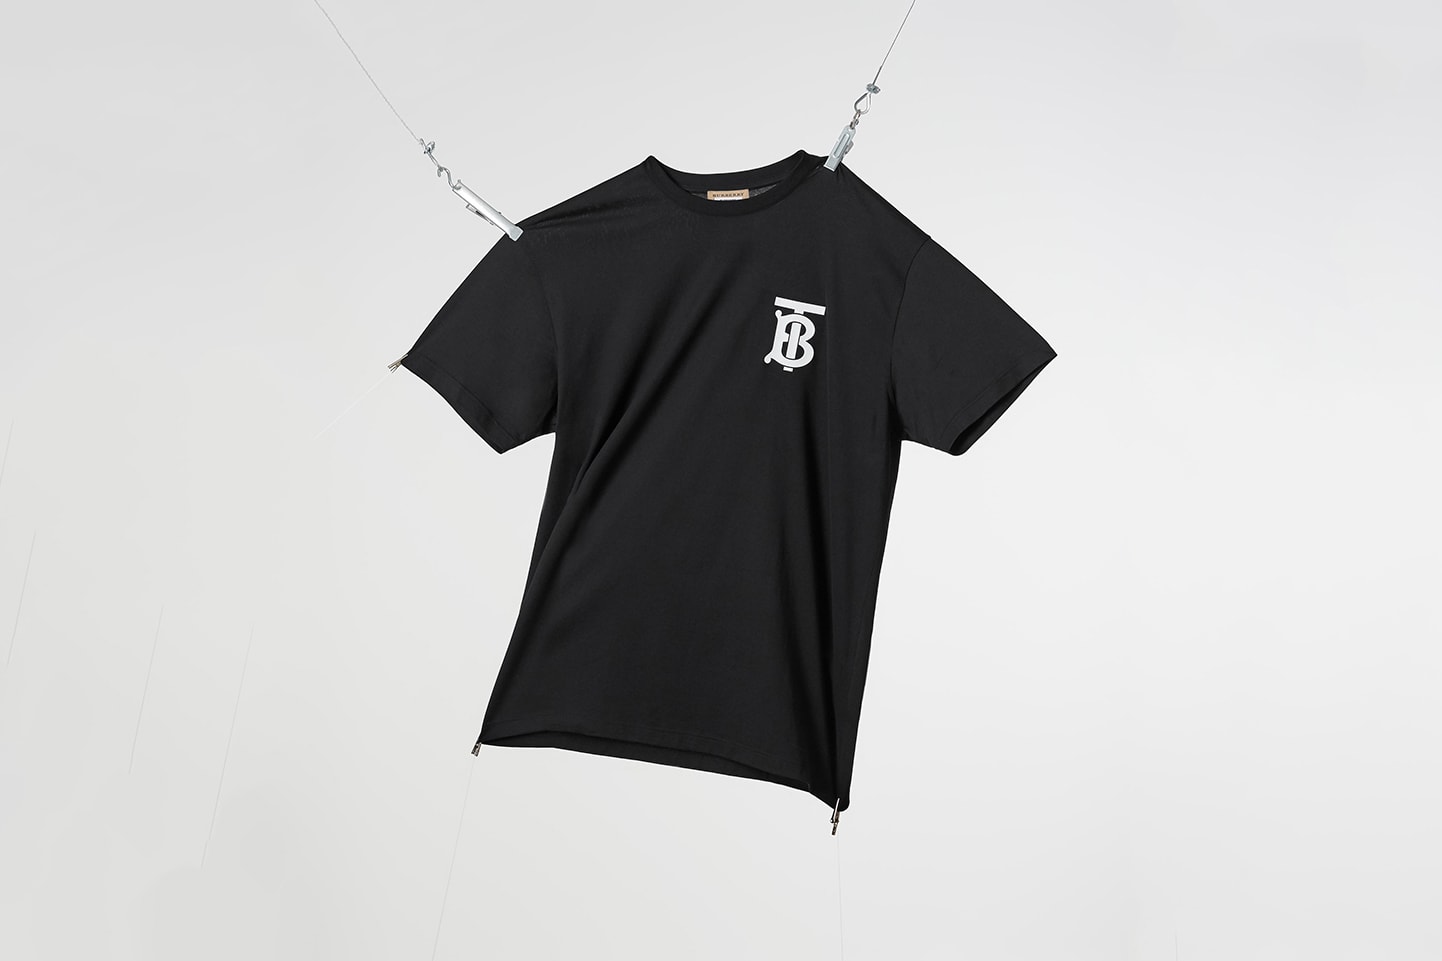 Thomas Burberry Monogram T-Shirt Details Cop Purchase Buy Available Now Instagram Clothing Fashion Garment WeChat London Fashion Week First Collection